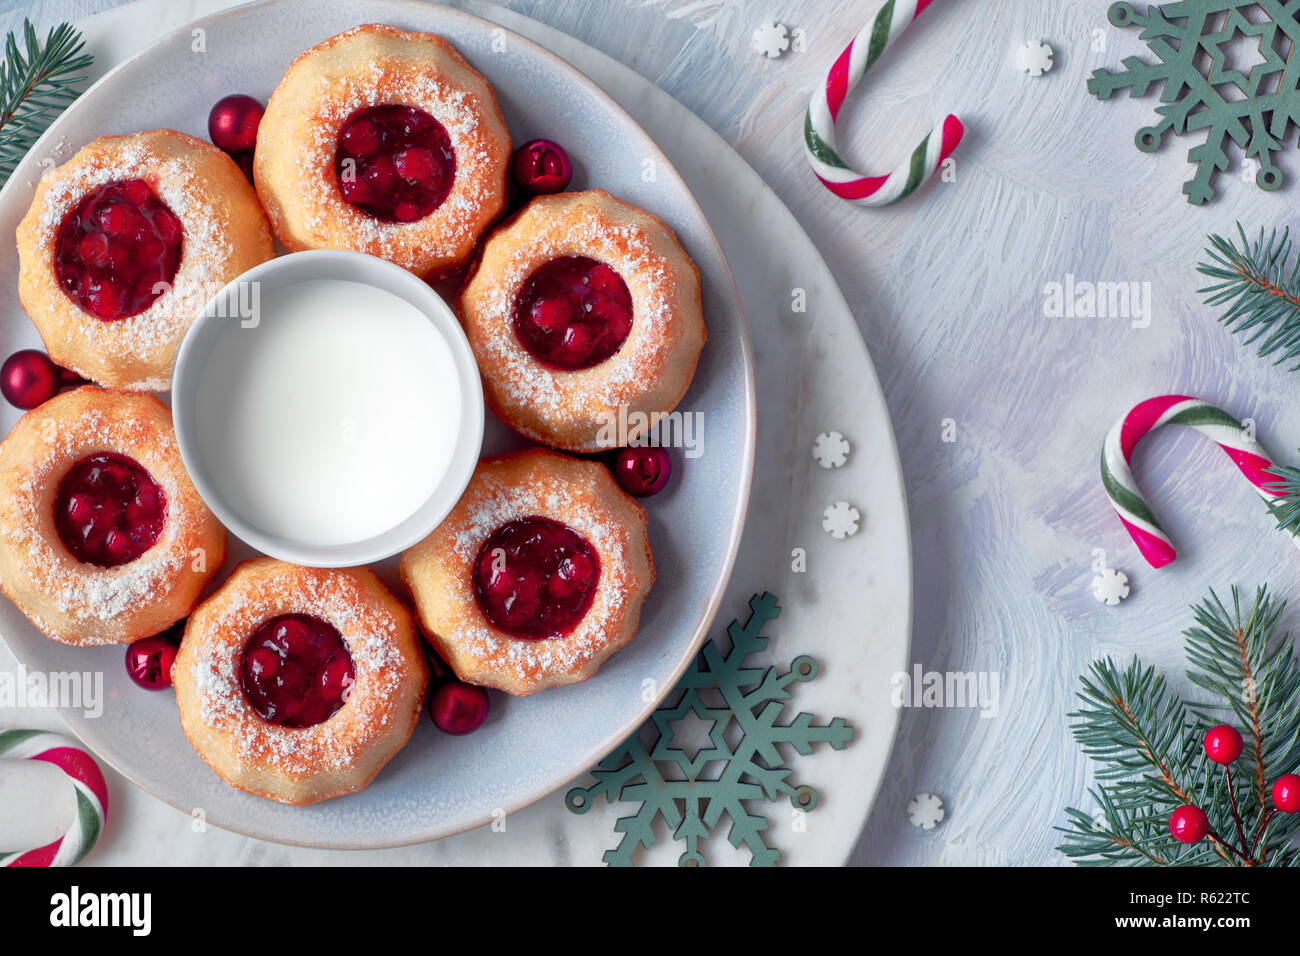 Mini bundt ring cakes with red whortleberry jam on light background with fir twigs, berries and candy canes. Christmas holiday sweet food. Stock Photo